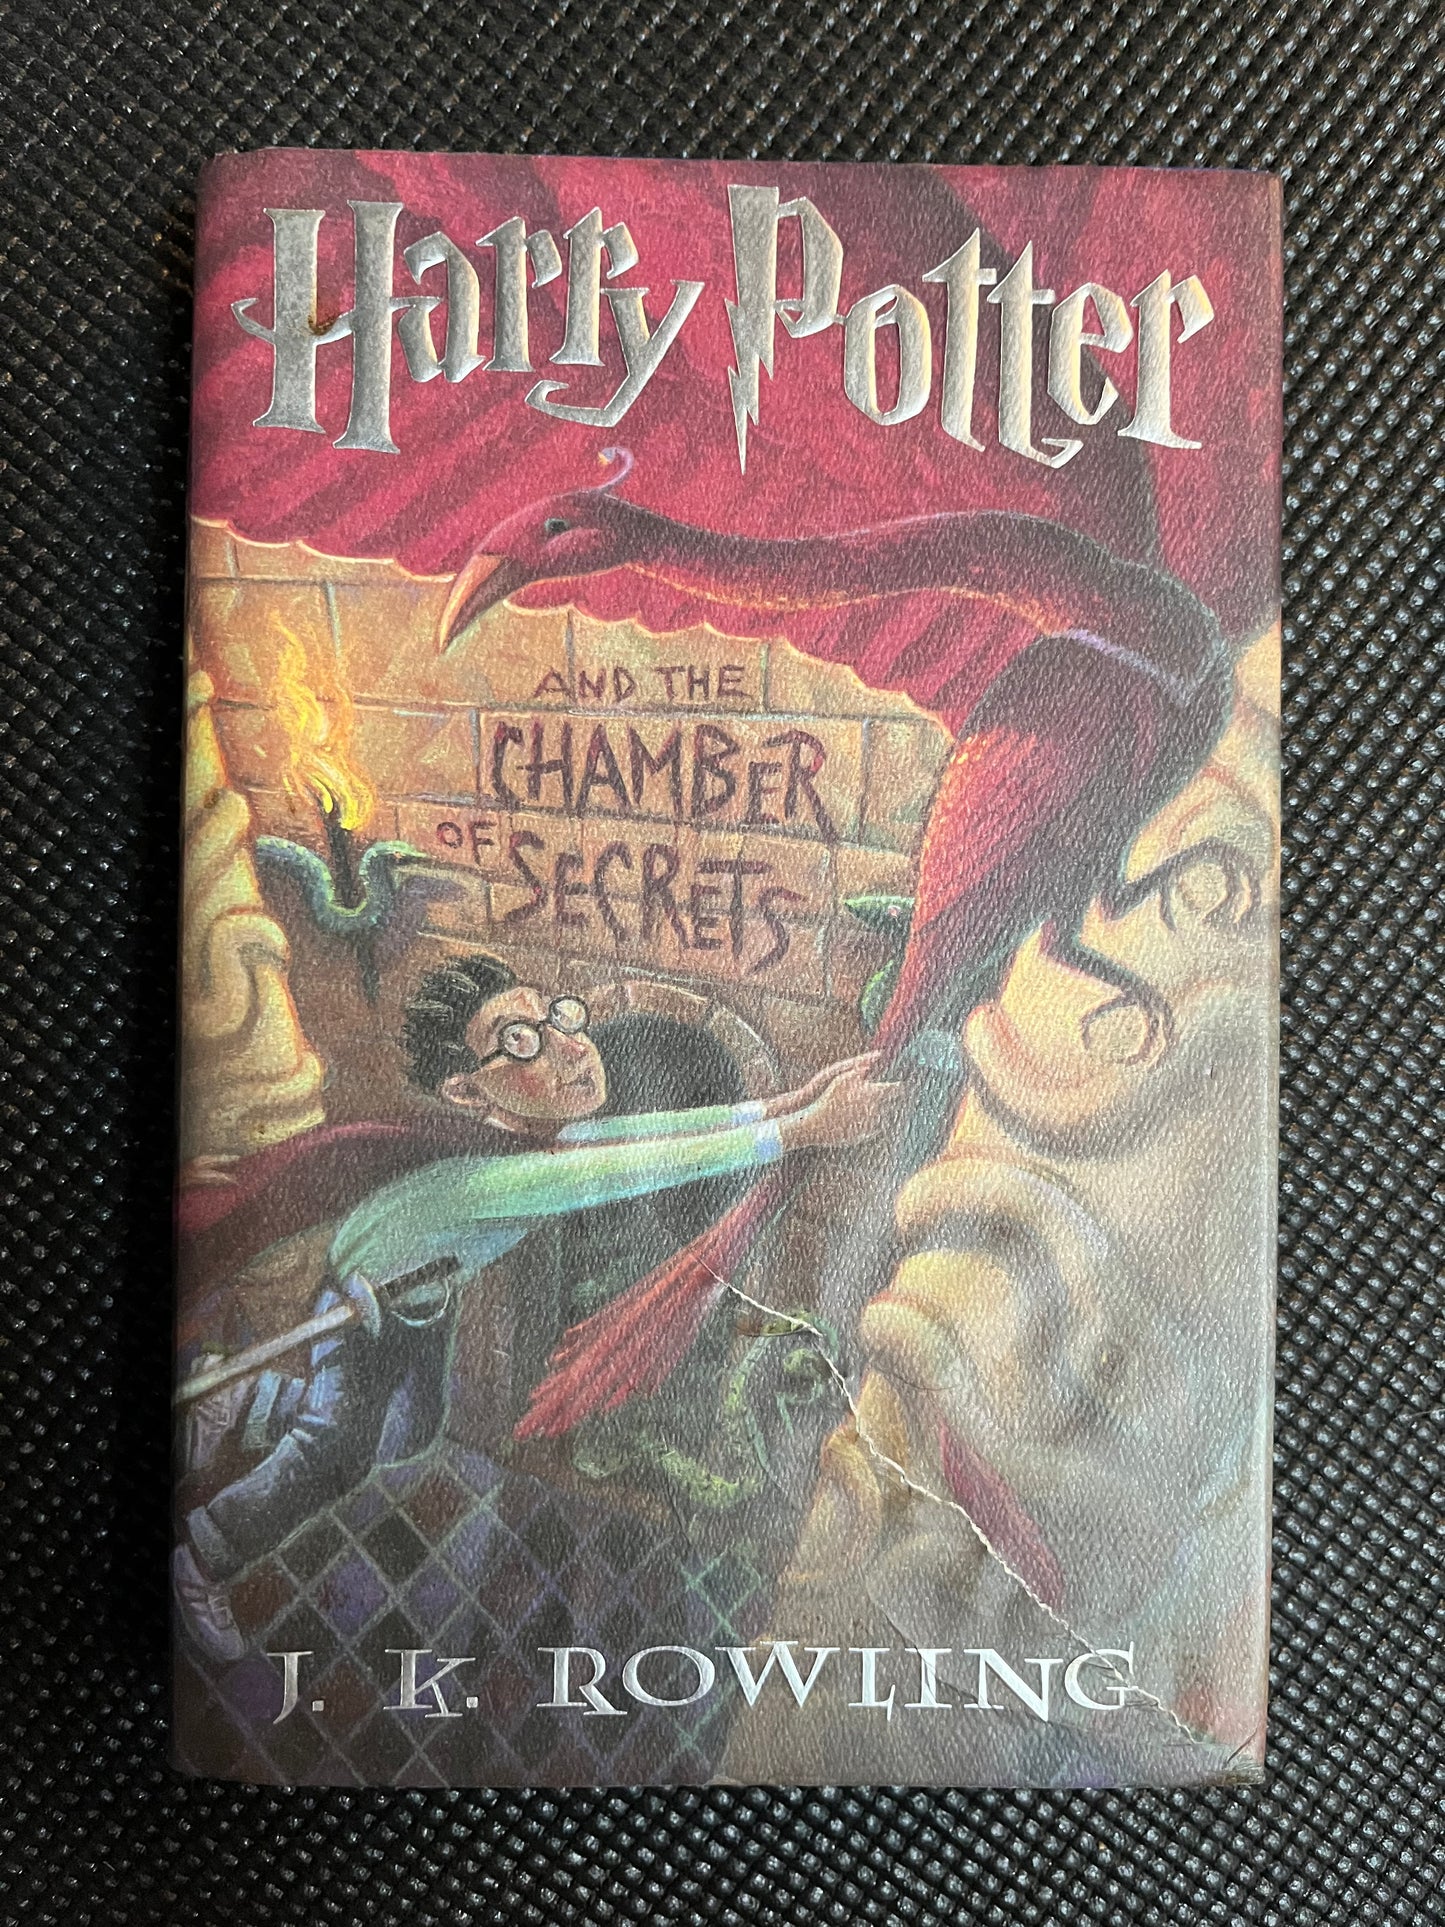 Harry Potter and the Chamber of Secrets PPU 45230